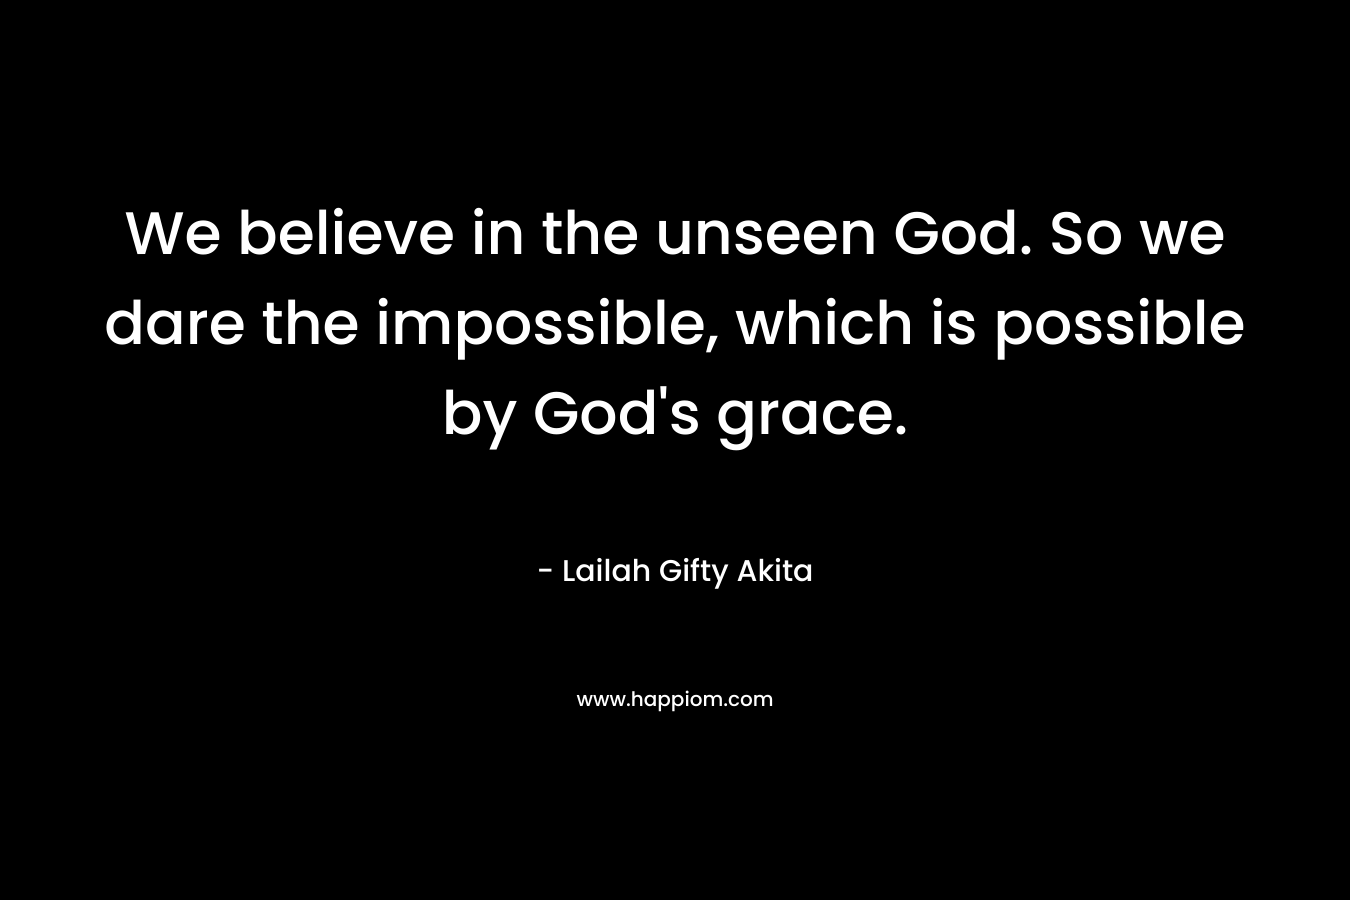 We believe in the unseen God. So we dare the impossible, which is possible by God's grace.